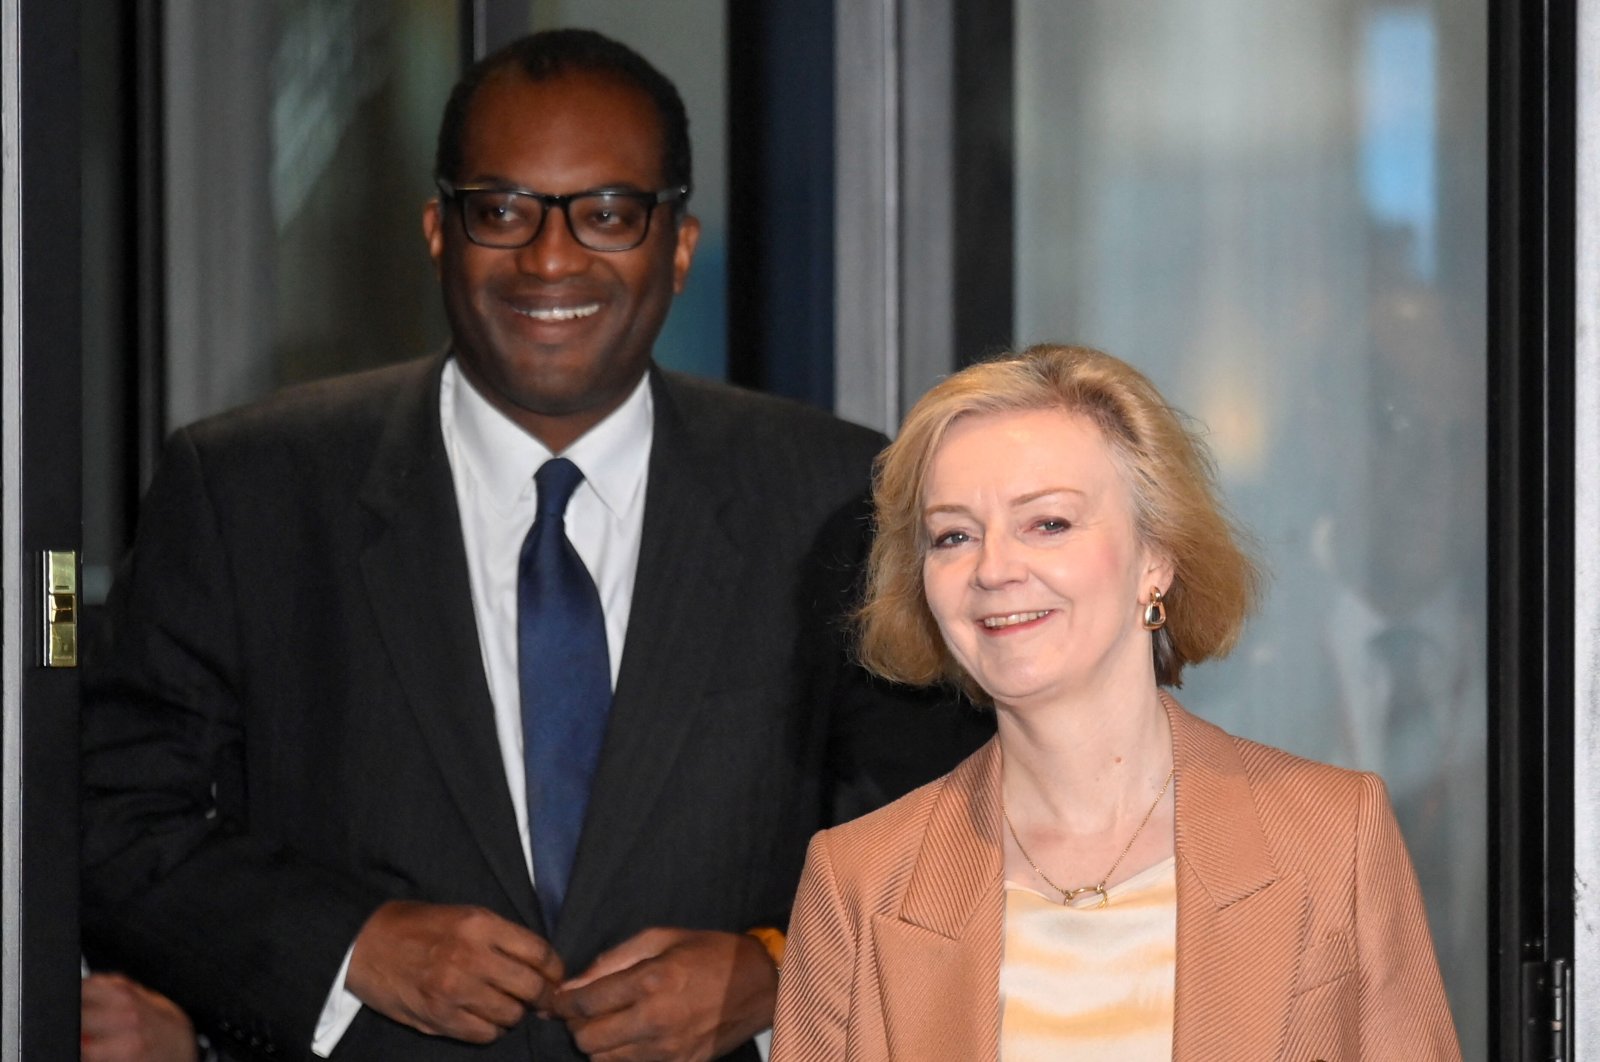 British Prime Minister Liz Truss and Chancellor of the Exchequer Kwasi Kwarteng walk outside a hotel in Birmingham, Britain, Oct. 4, 2022. (Reuters Photo)